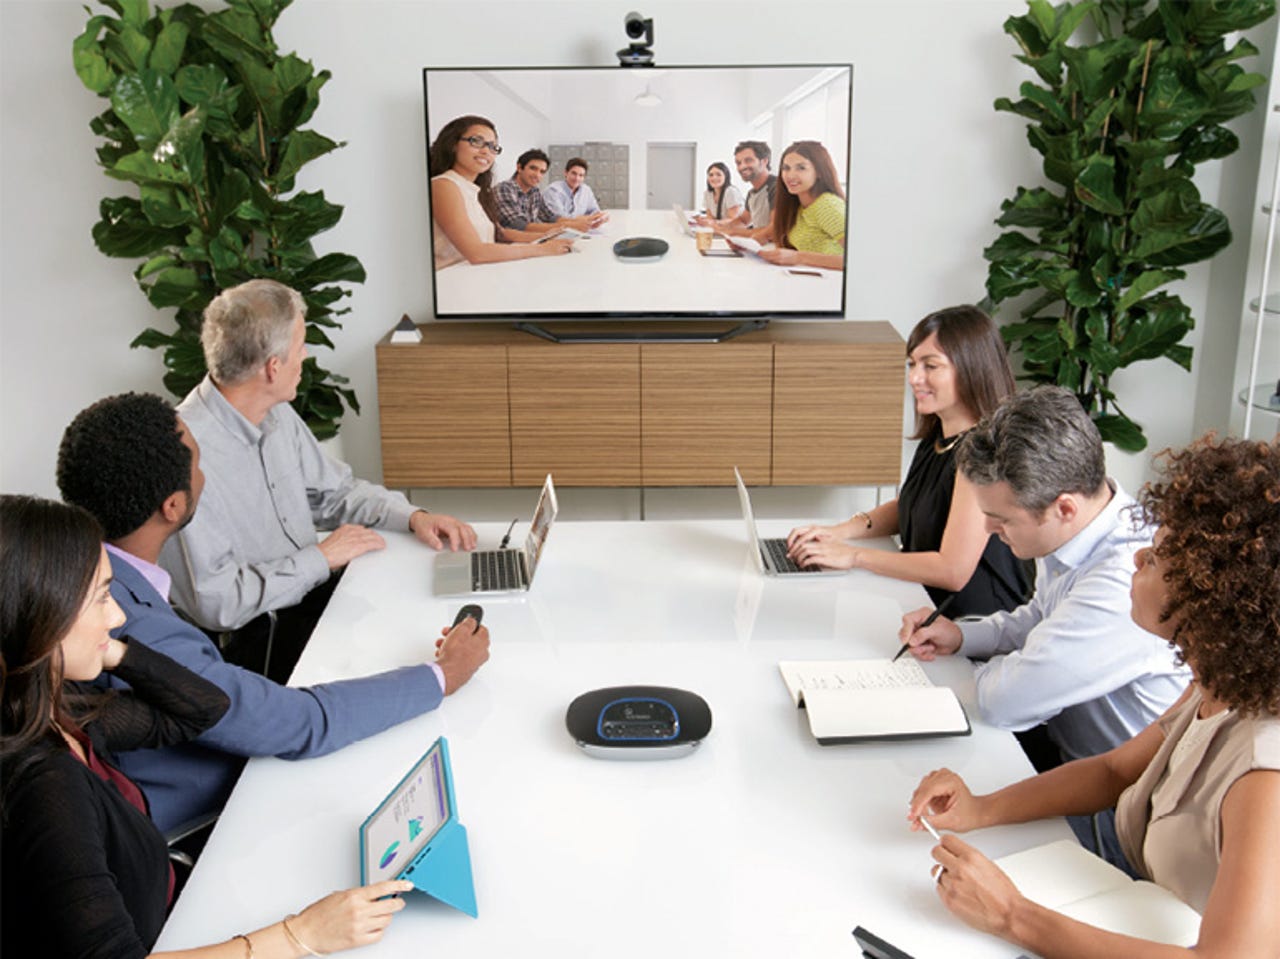 Asser kobling privilegeret Logitech's GROUP caters for bigger meeting rooms | ZDNET